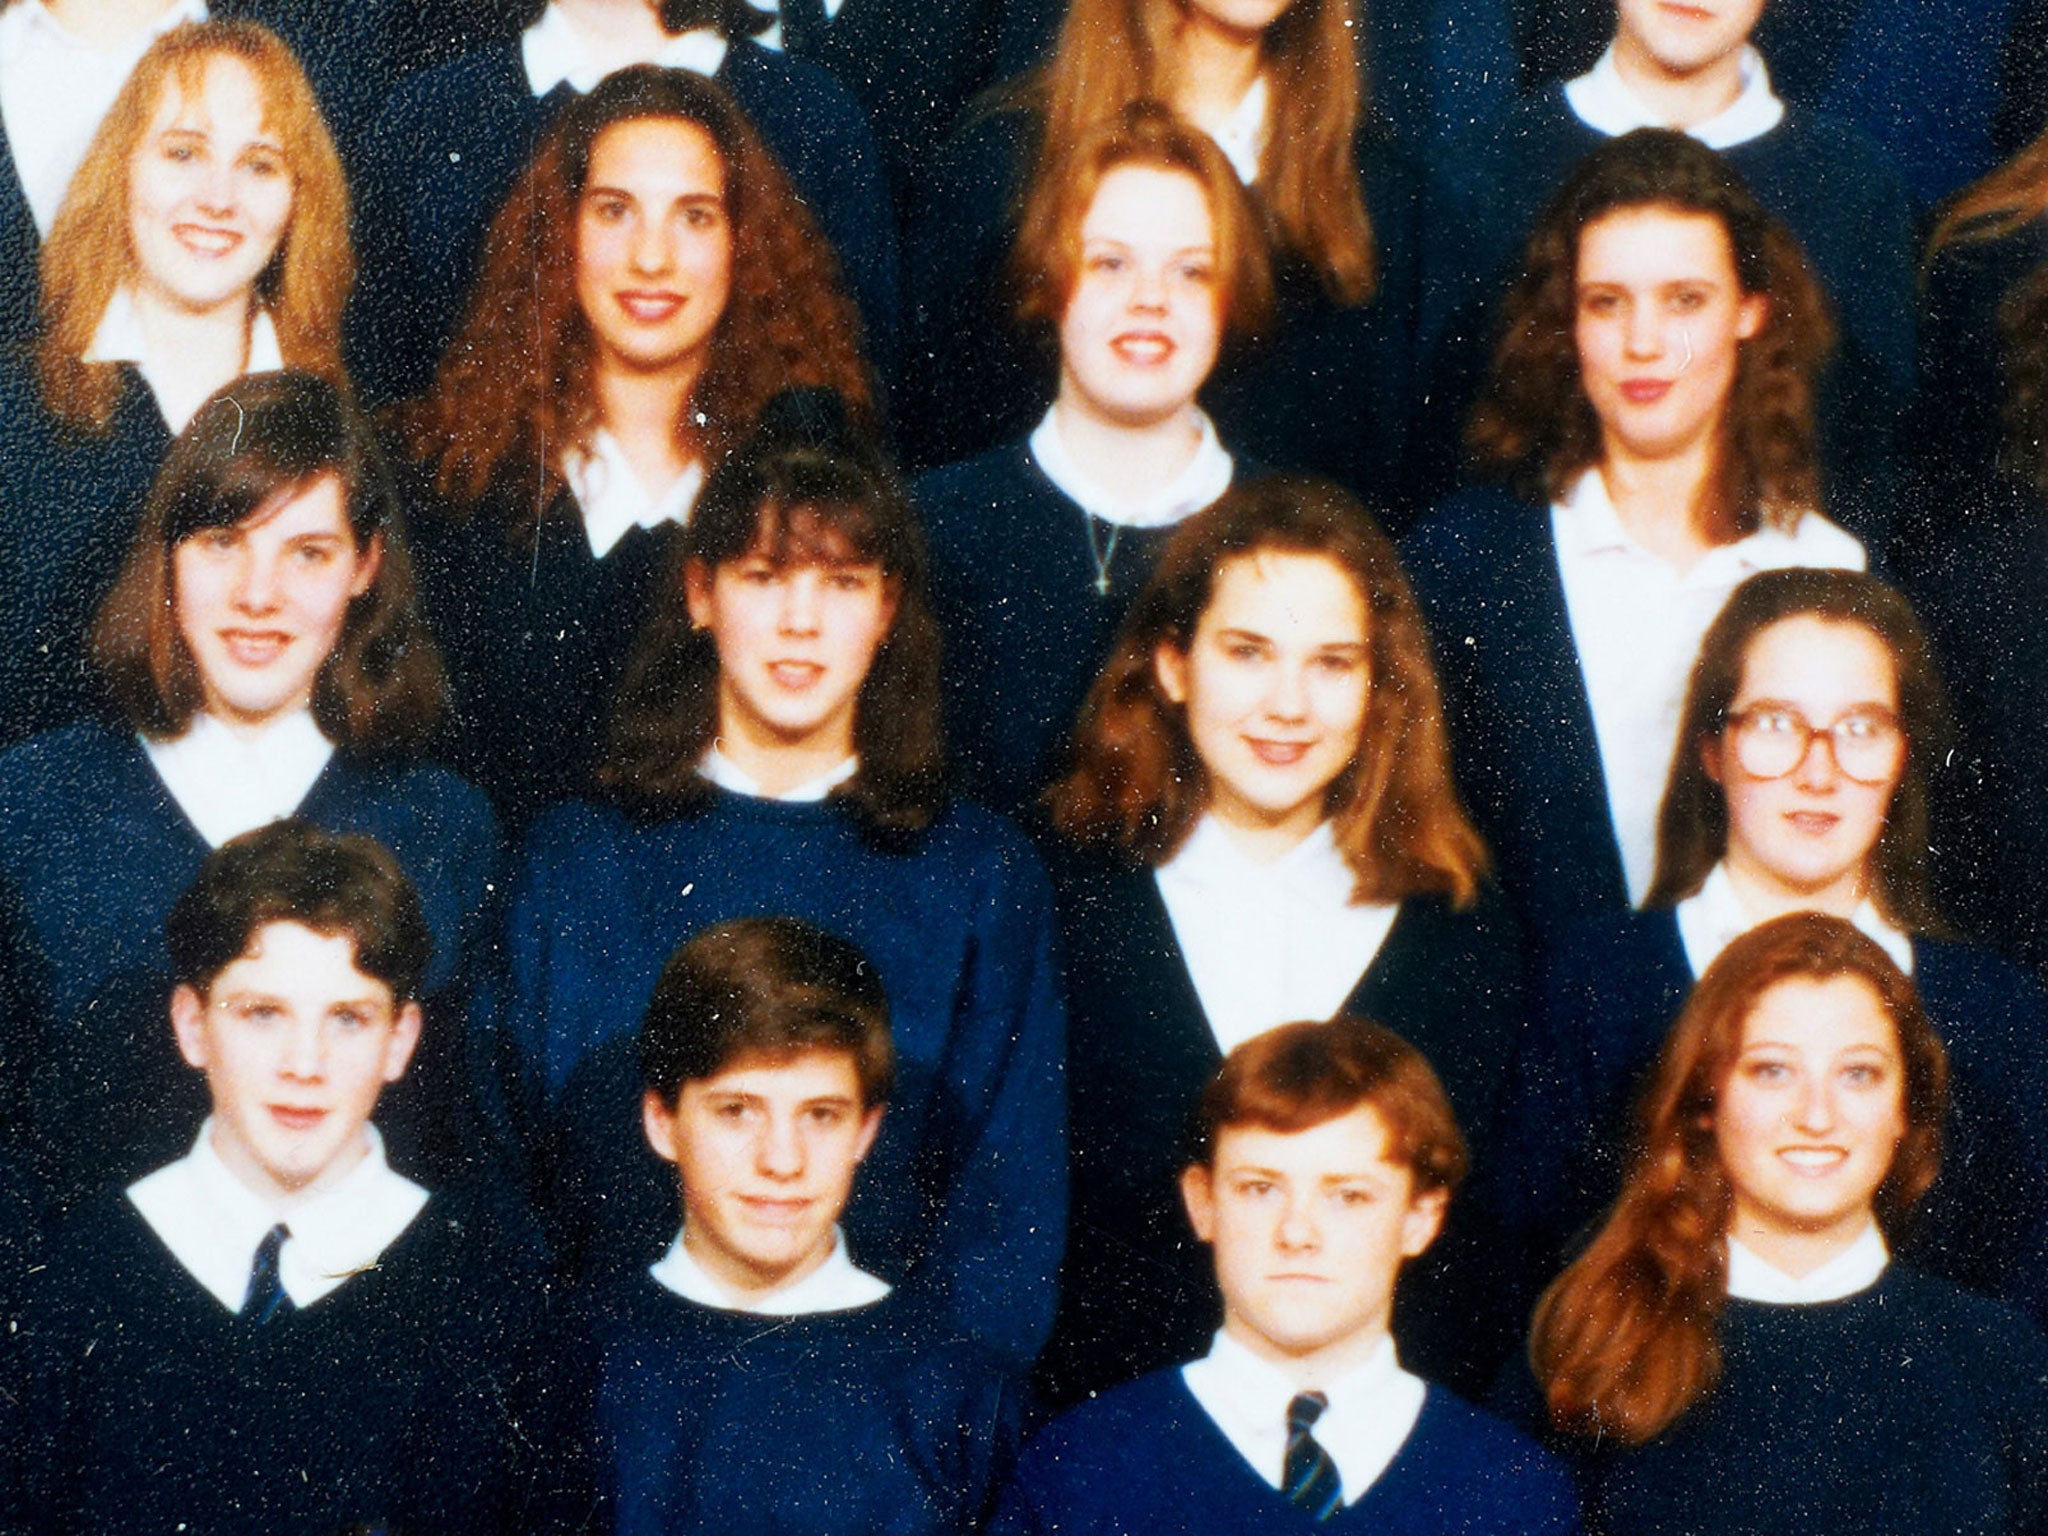 Sophie at school, second from the right in the middle row